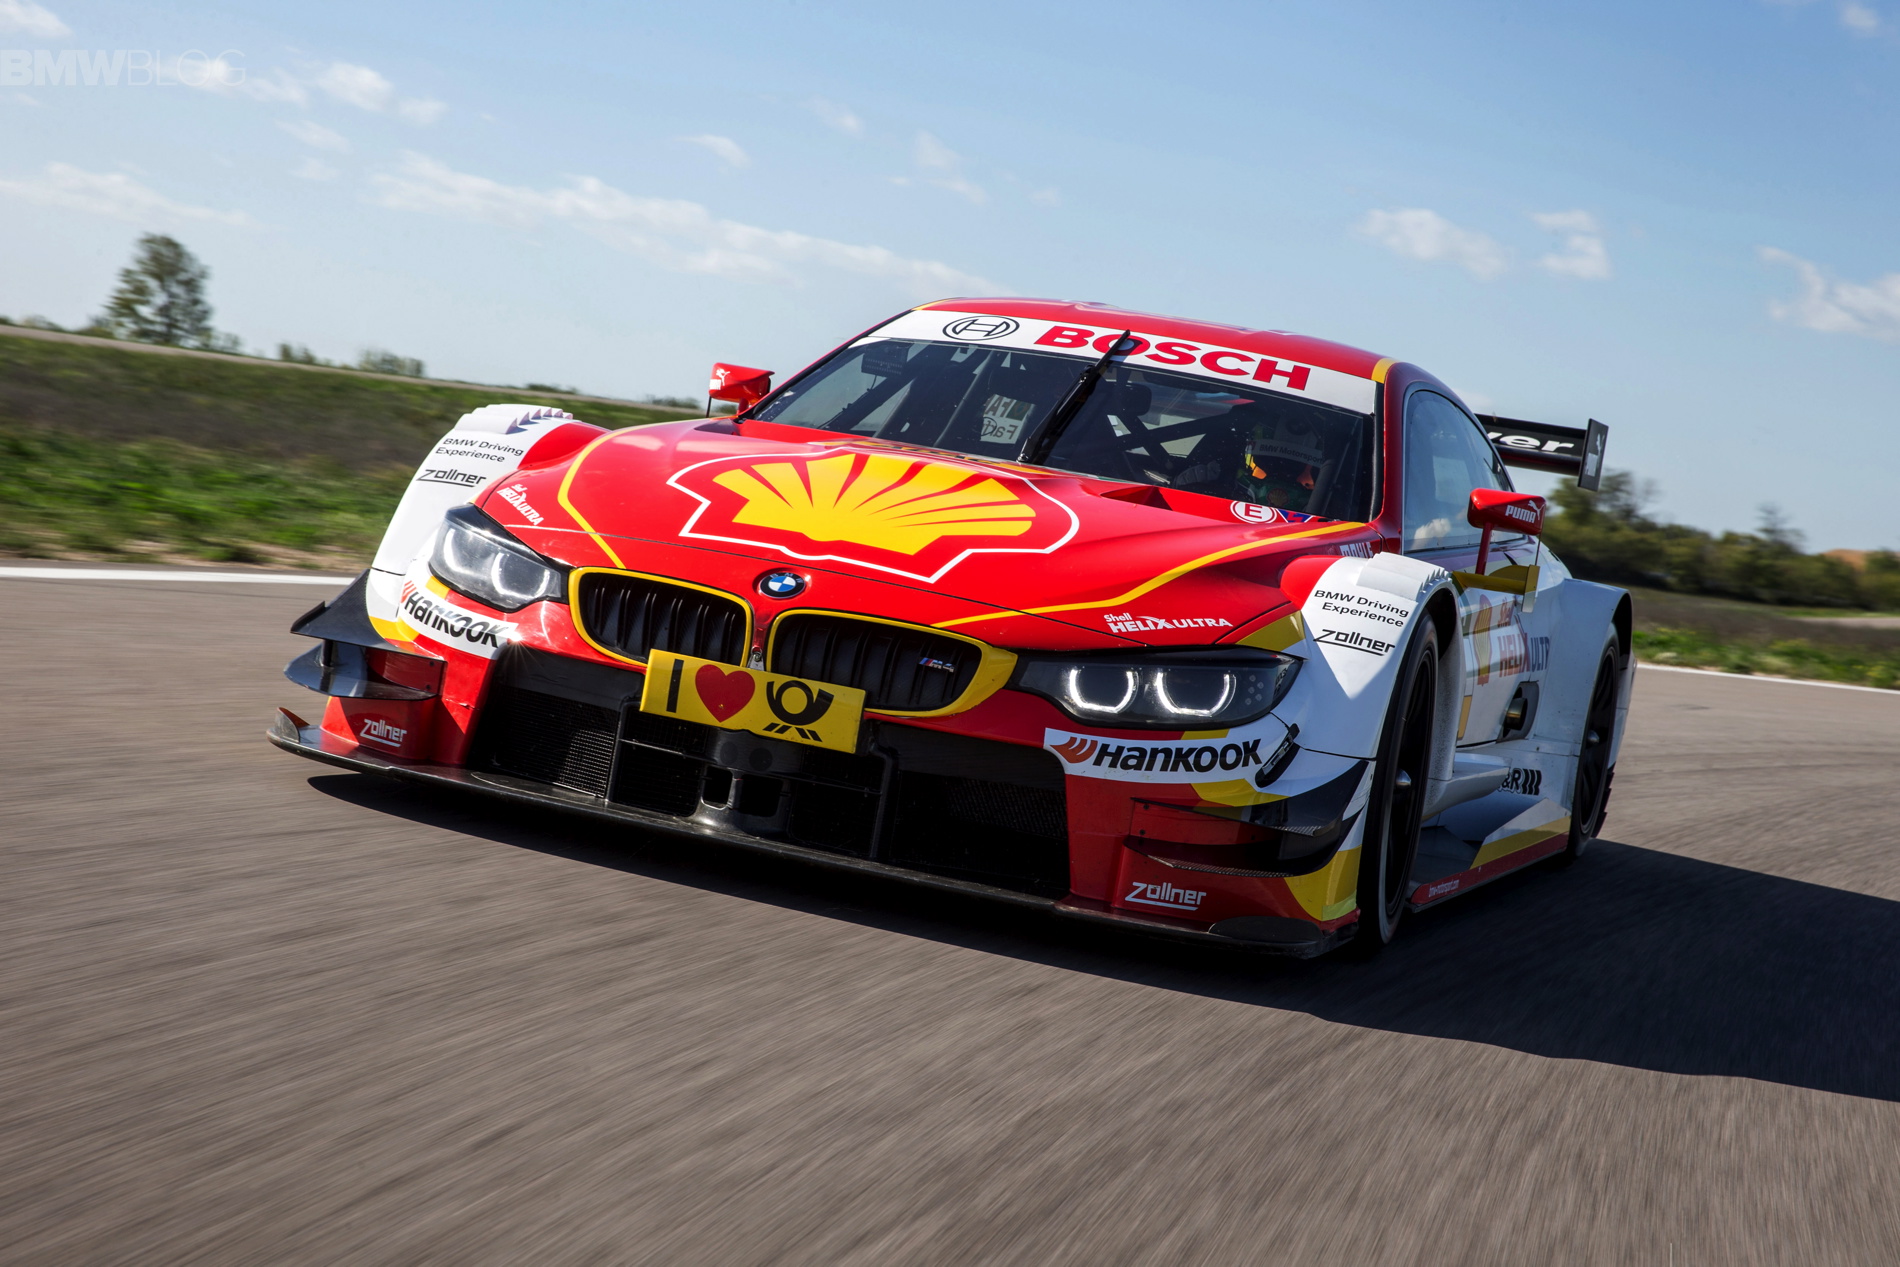 Bmw Motorsport And Shell Race Together In The Dtm Uscc And The “green